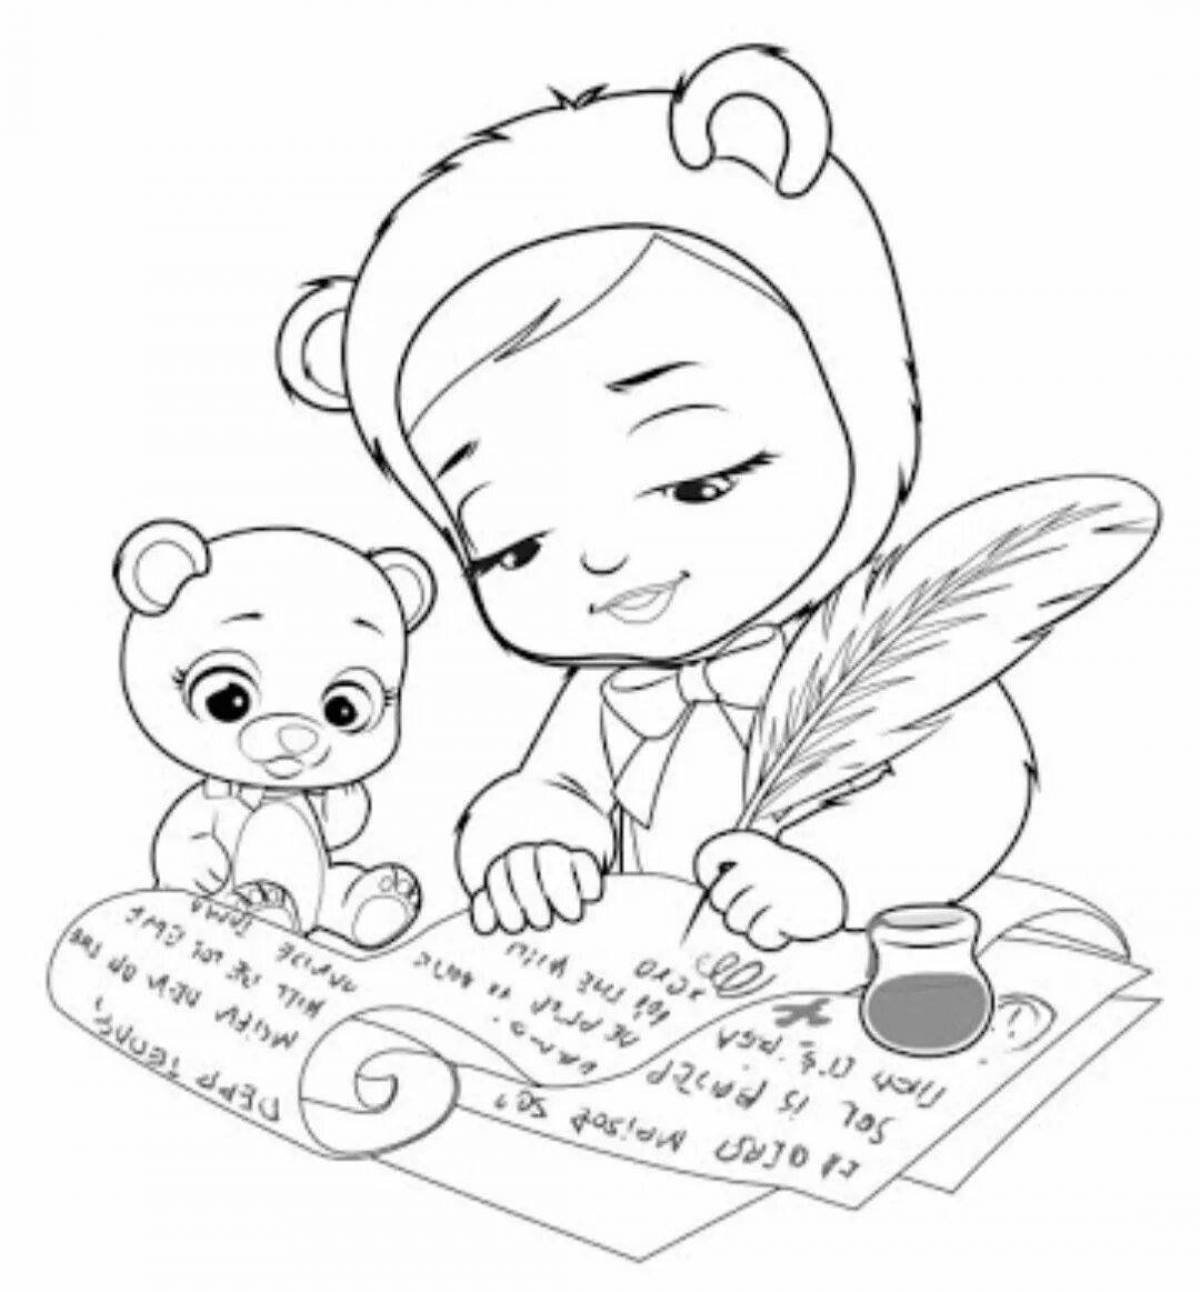 Funny crybaby coloring book